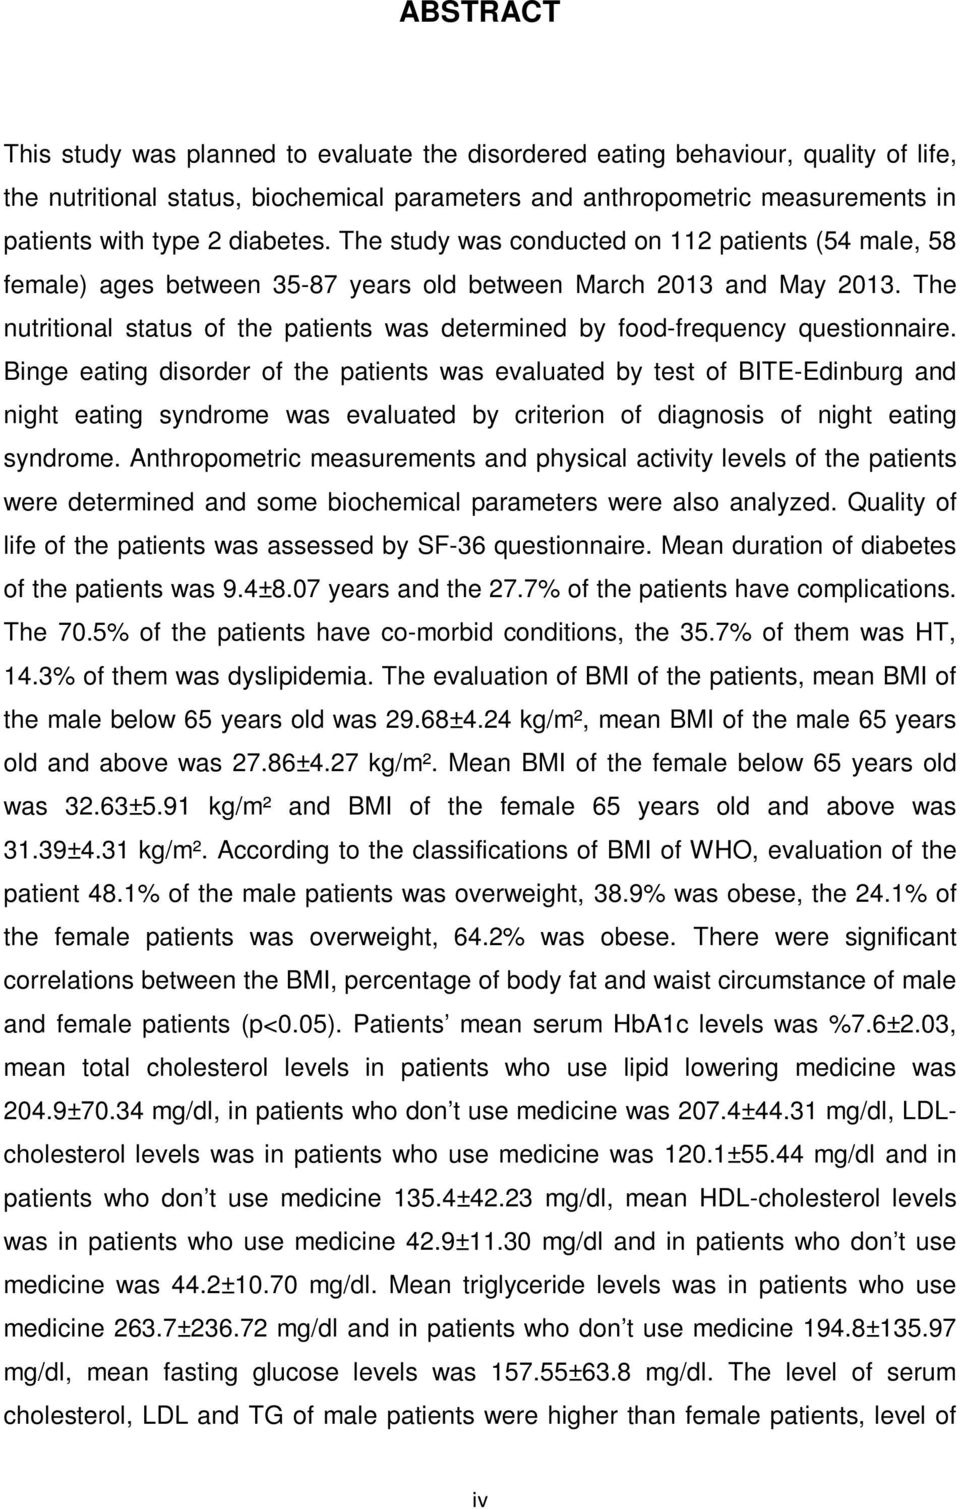 The nutritional status of the patients was determined by food-frequency questionnaire.